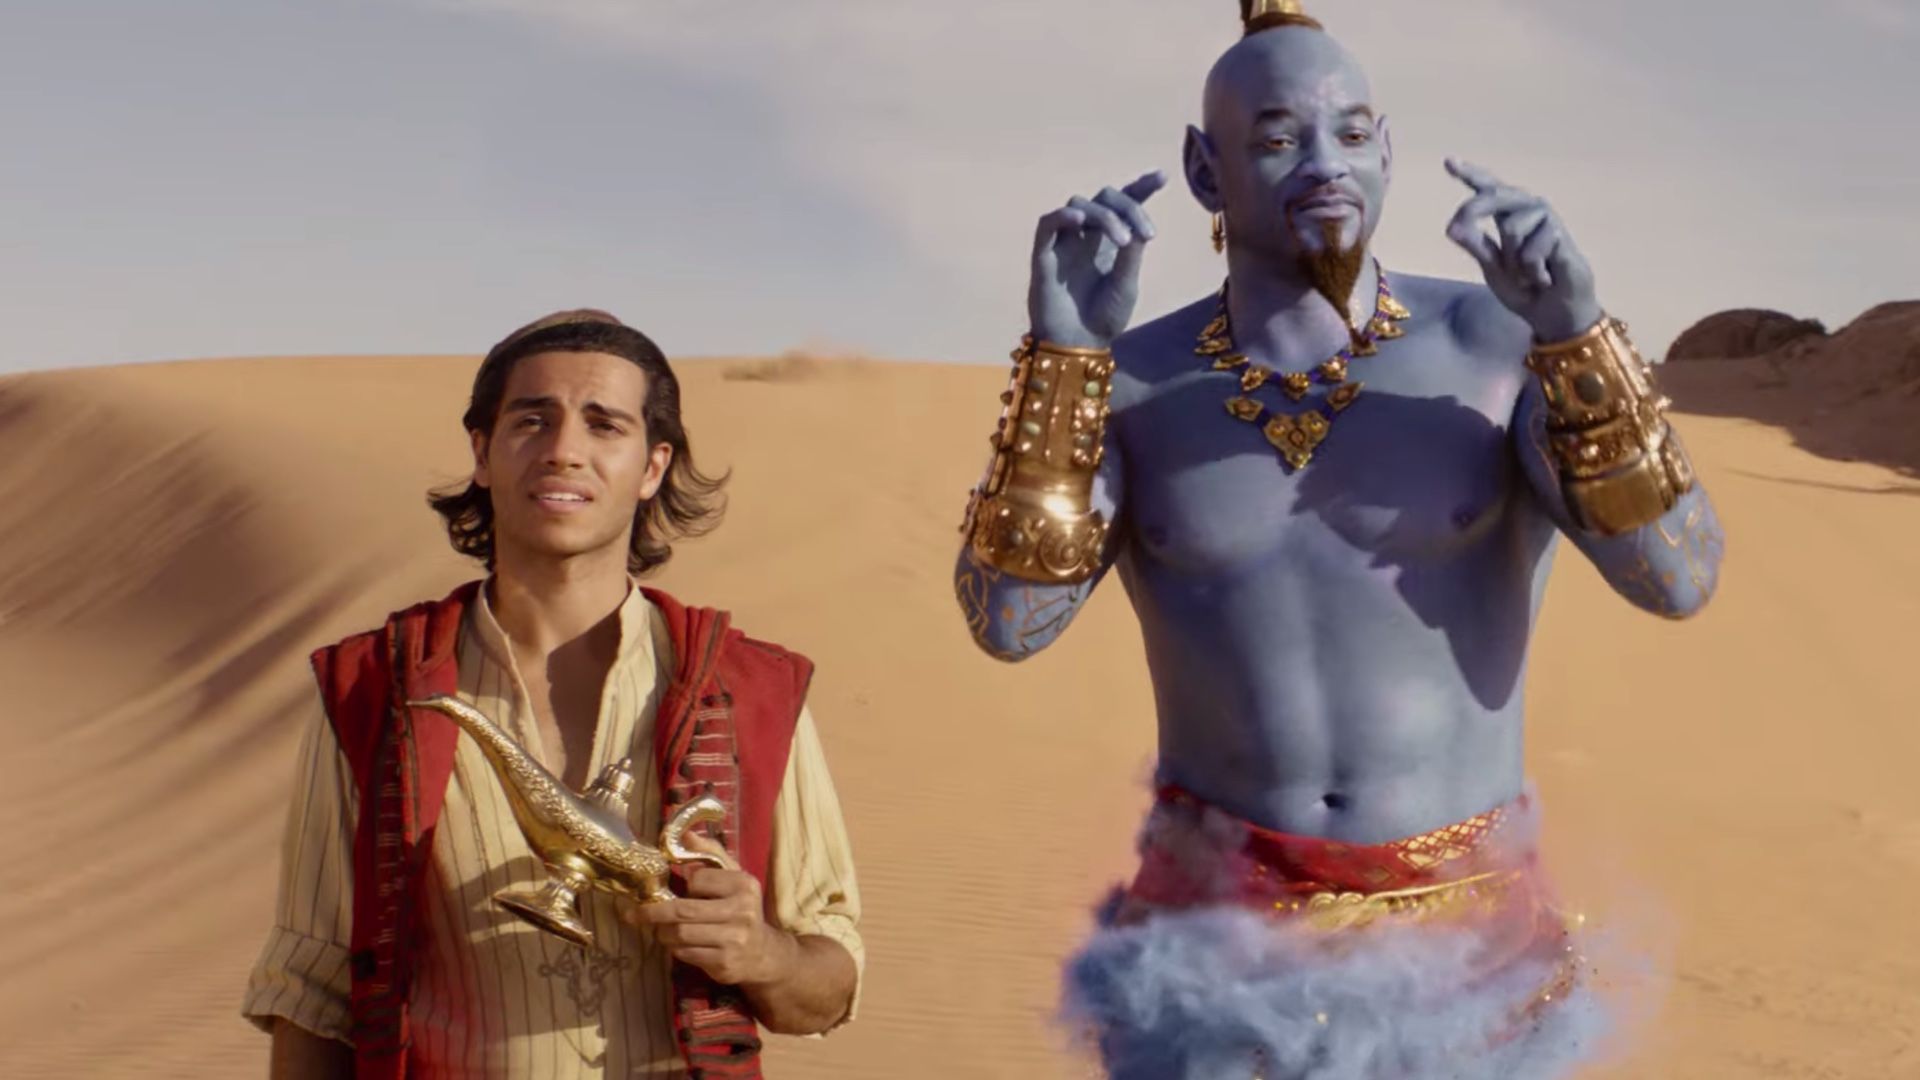 Aladdin (2019) movie review. The movie and me